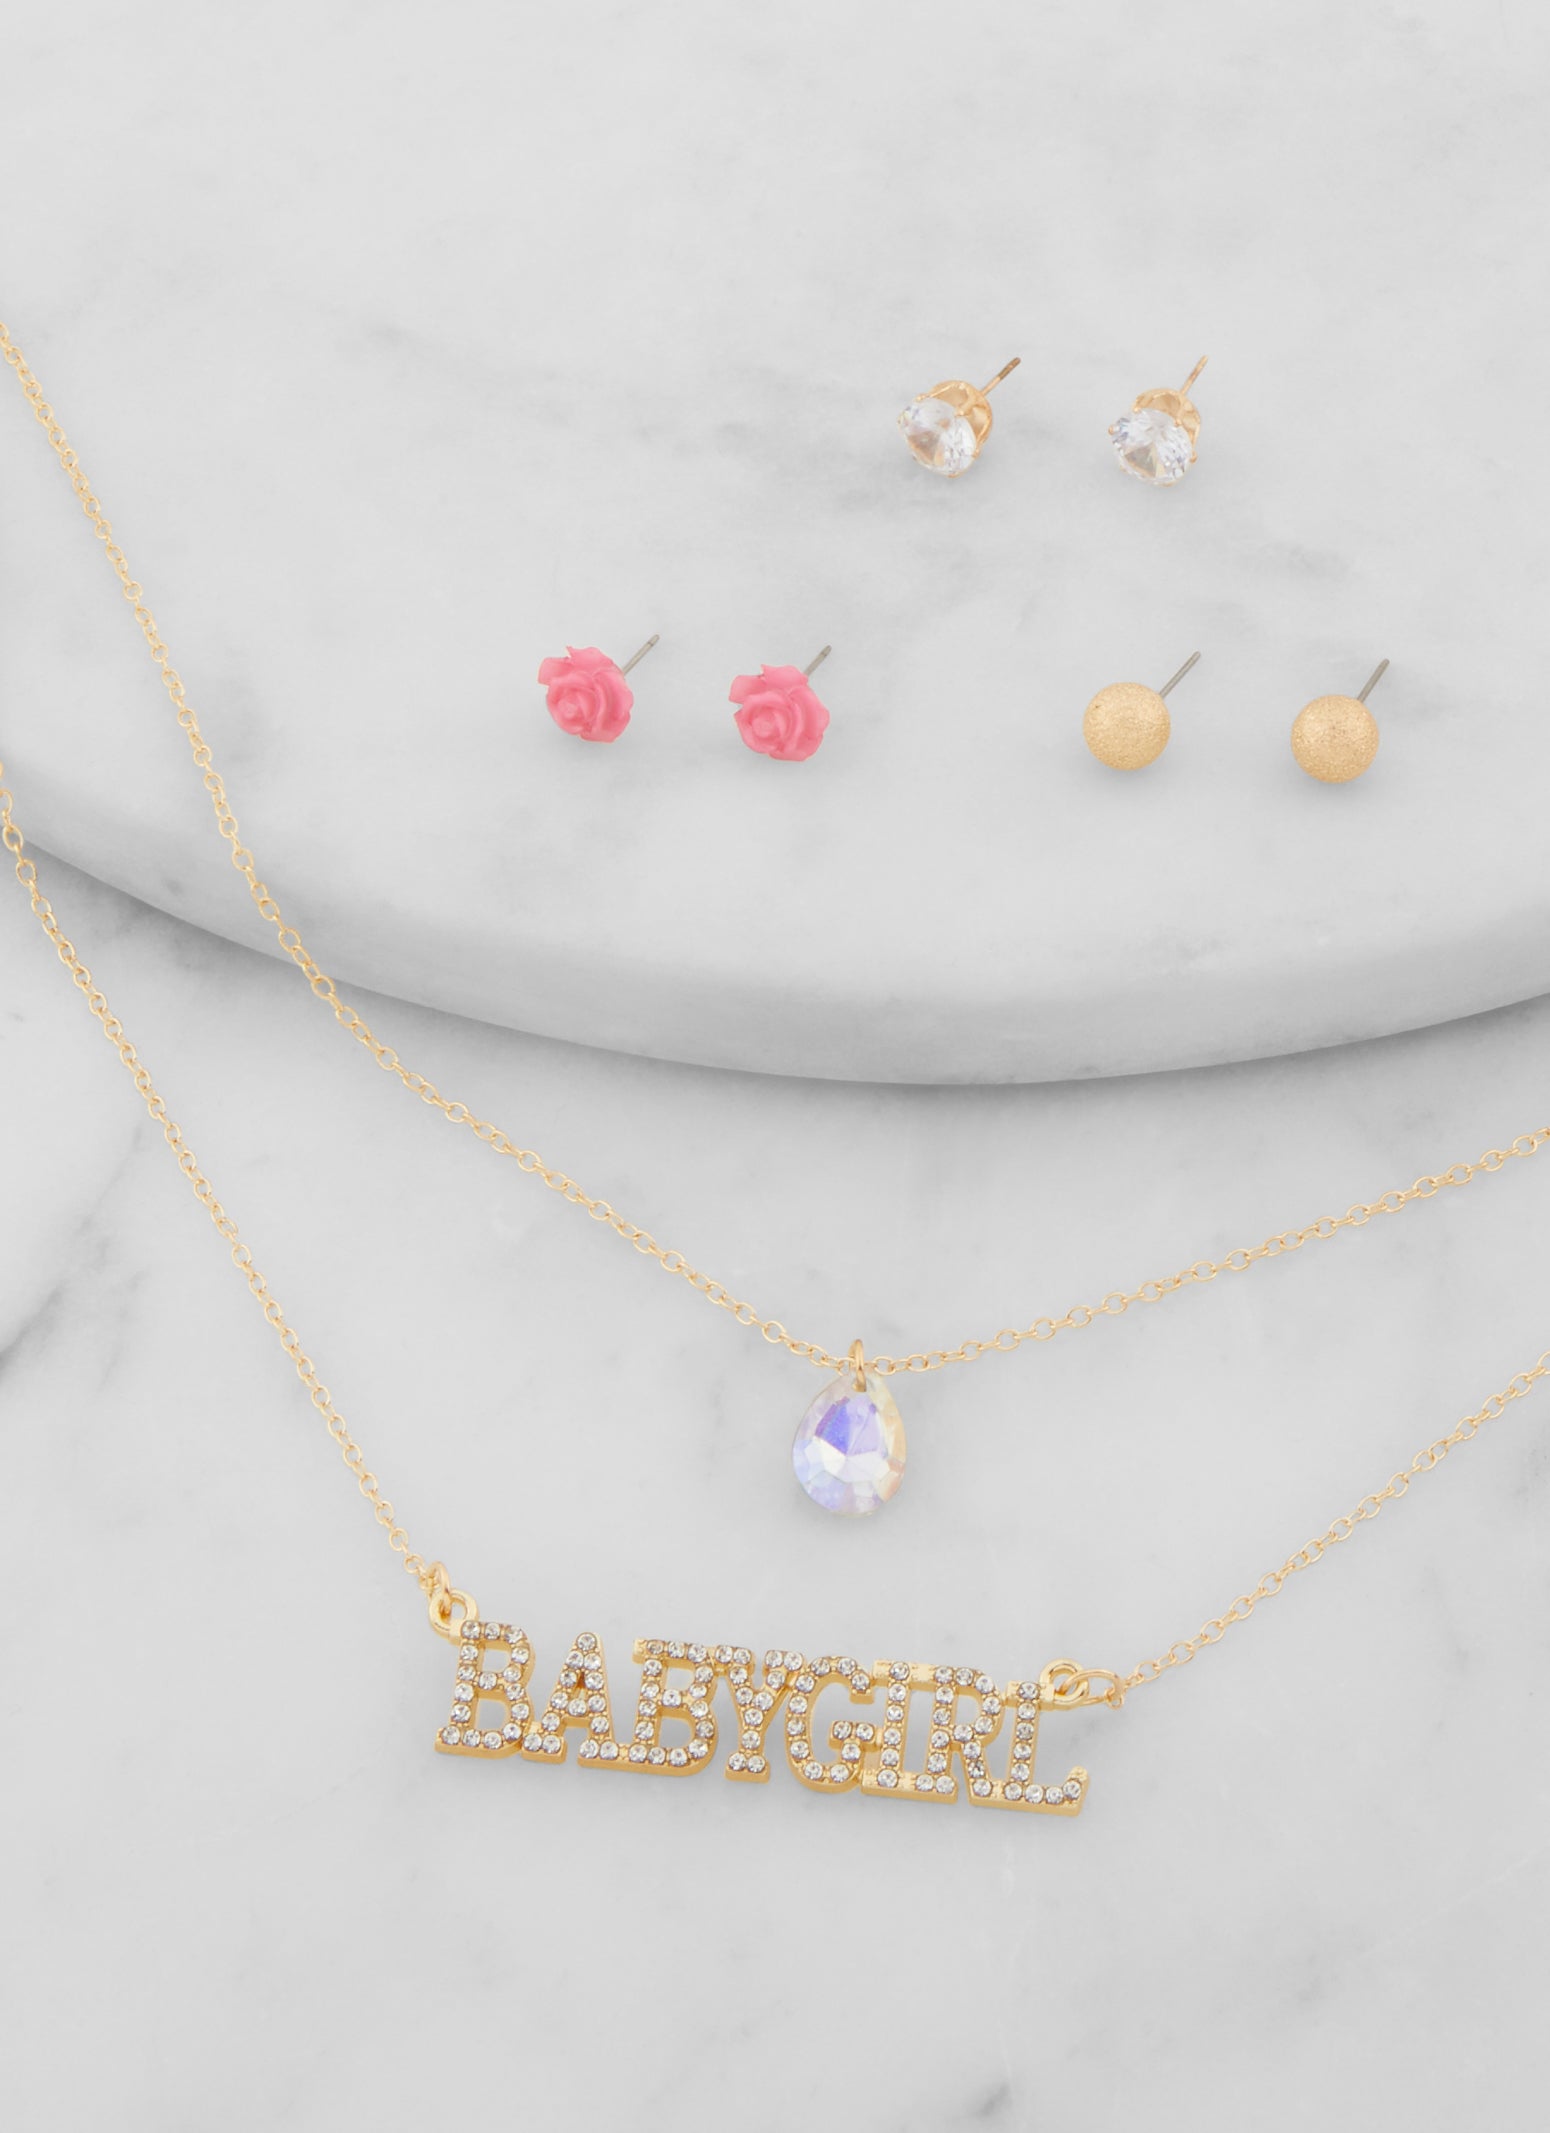 Babygirl Necklace, Babygirl Necklace Personalized, Babygirl Pendant, Baby  Girl Necklace, Baby Girl Old English Necklace, Babygirl Chain Gift - Etsy